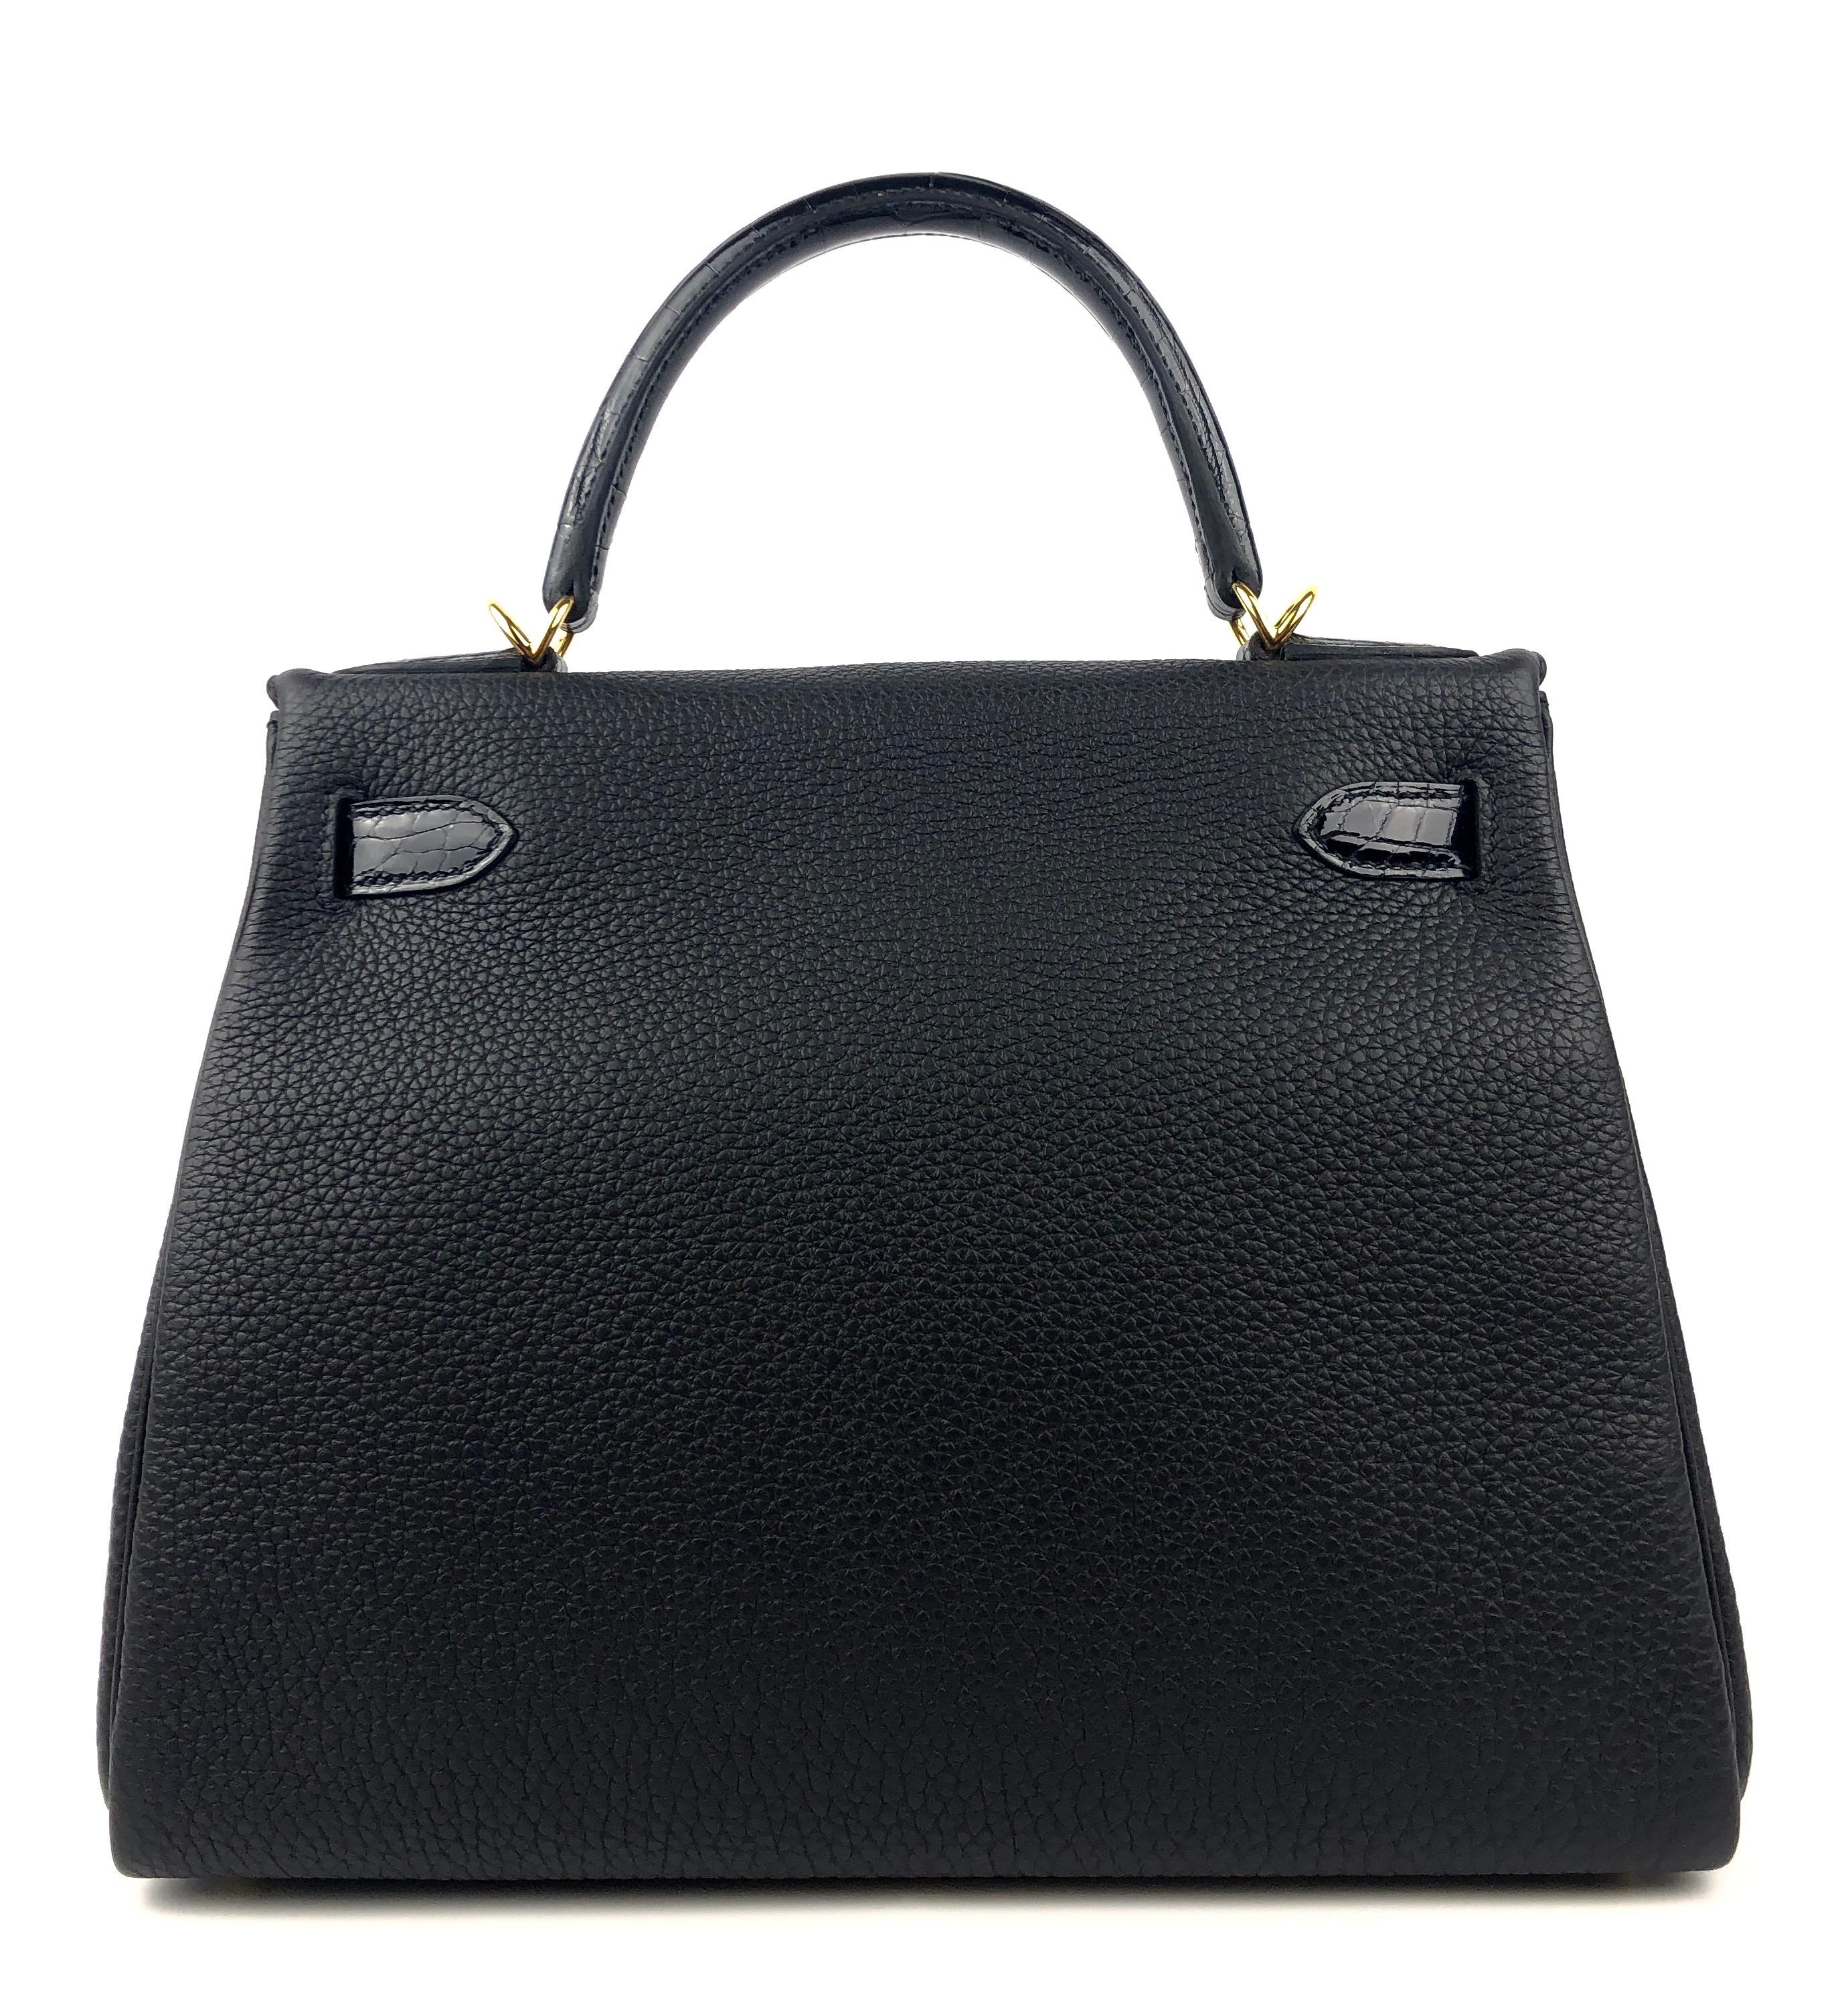 New Hermes Kelly 28 Touch Black Leather and Crocodile Gold Hardware ...